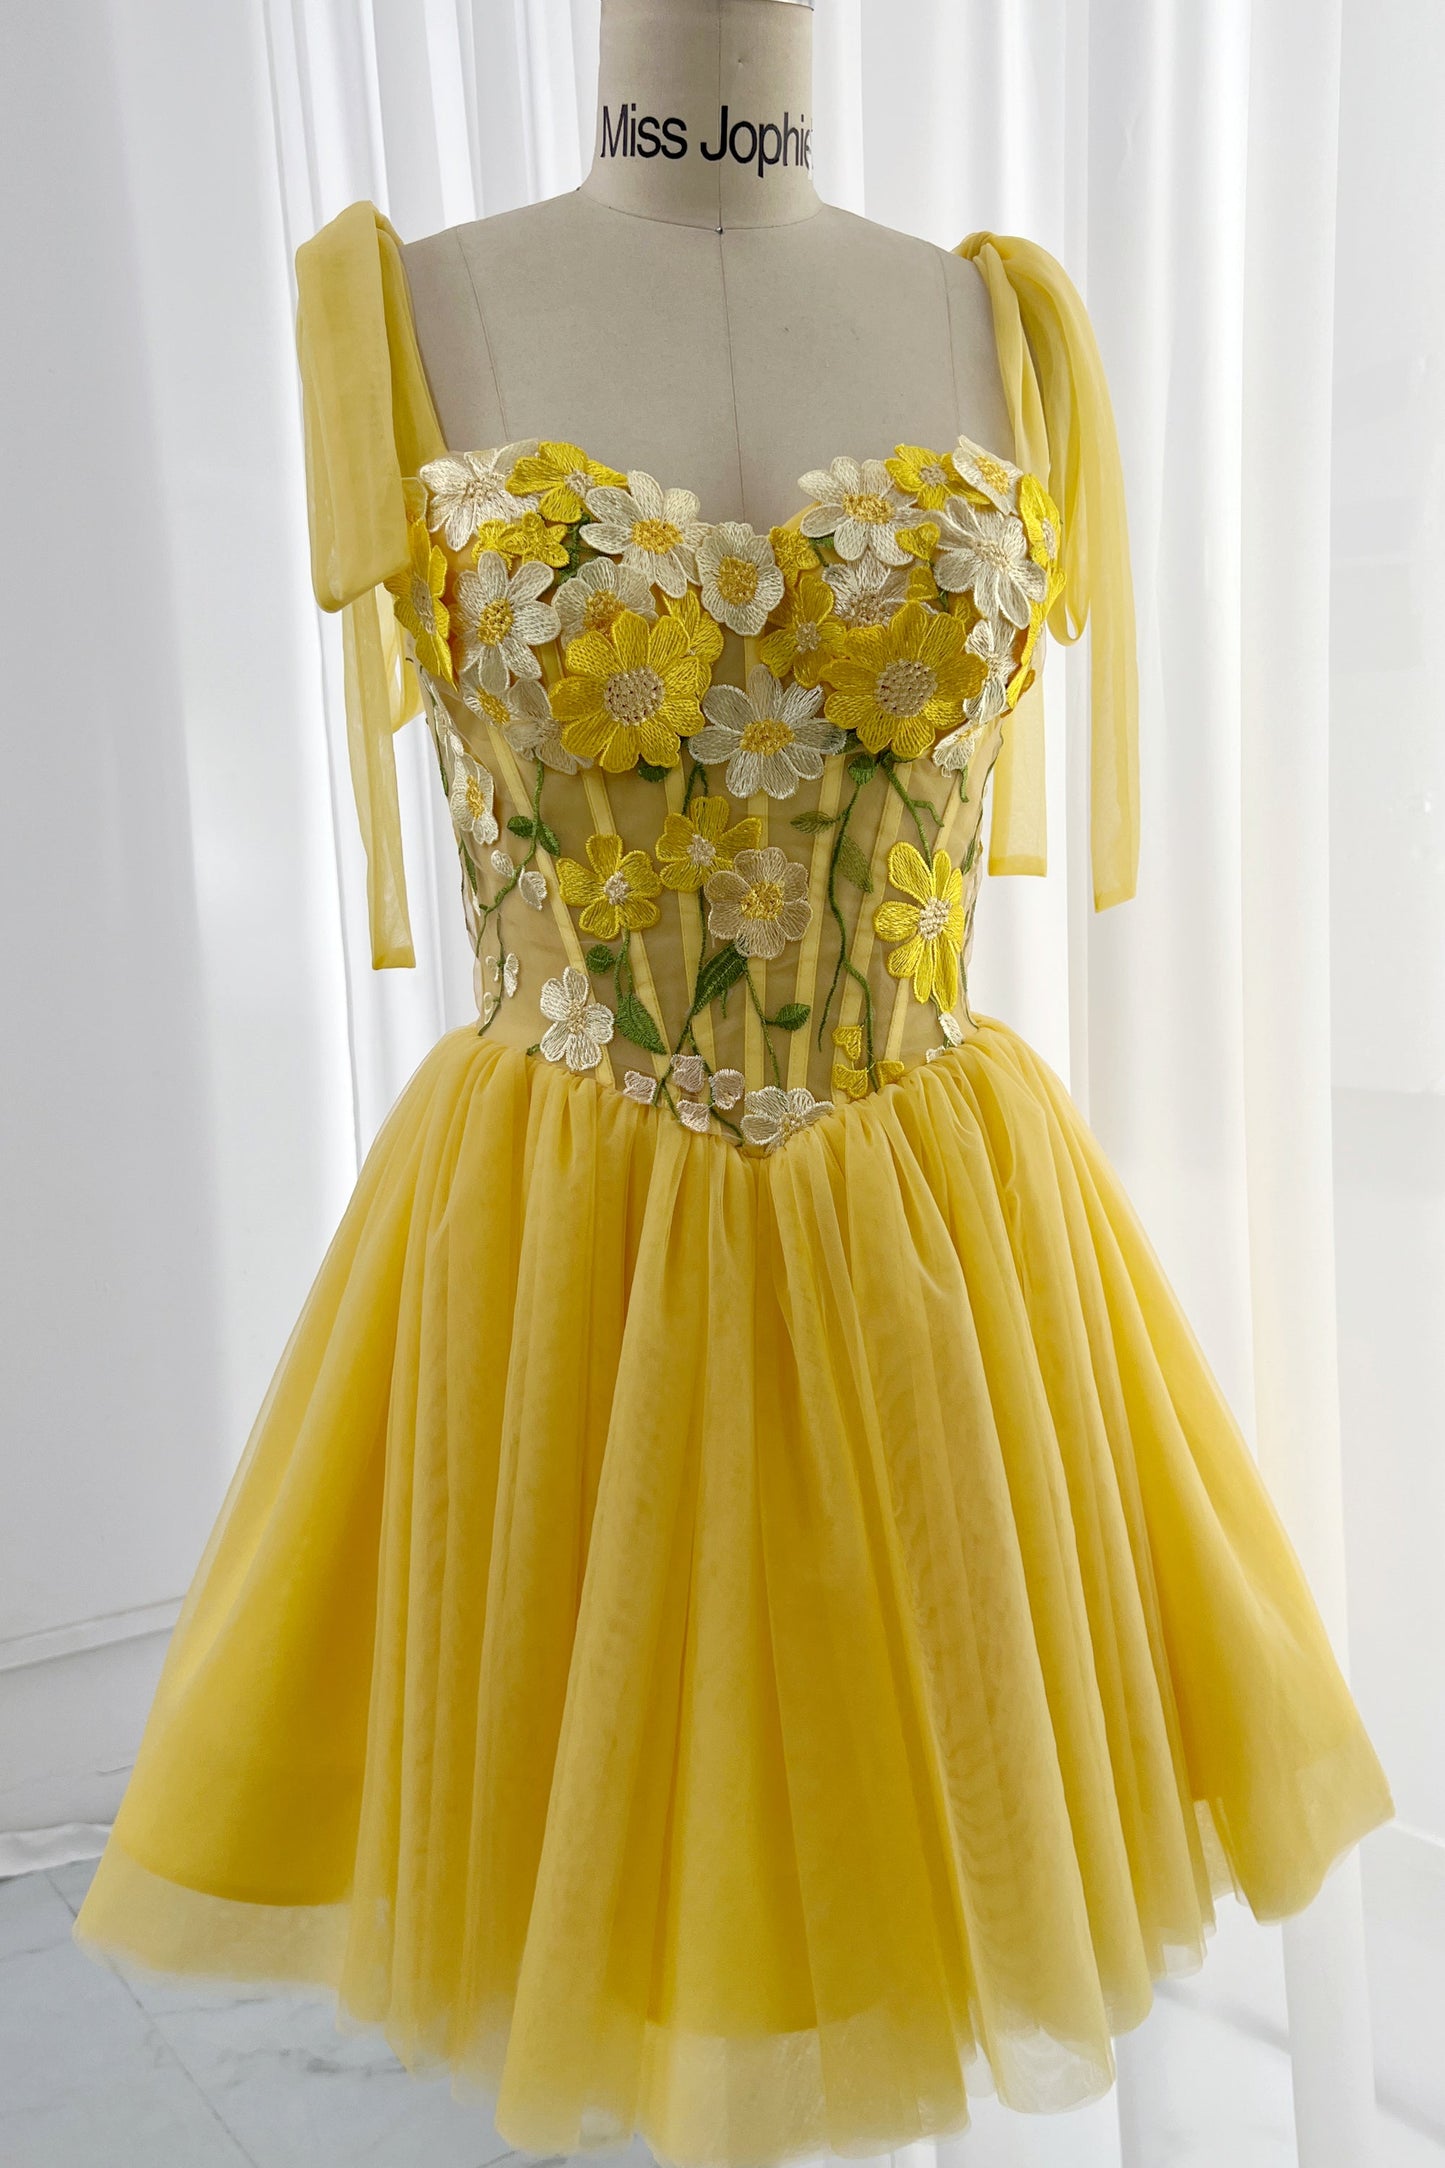 Corset Floral Embroidery Yellow Dress with Tie Straps